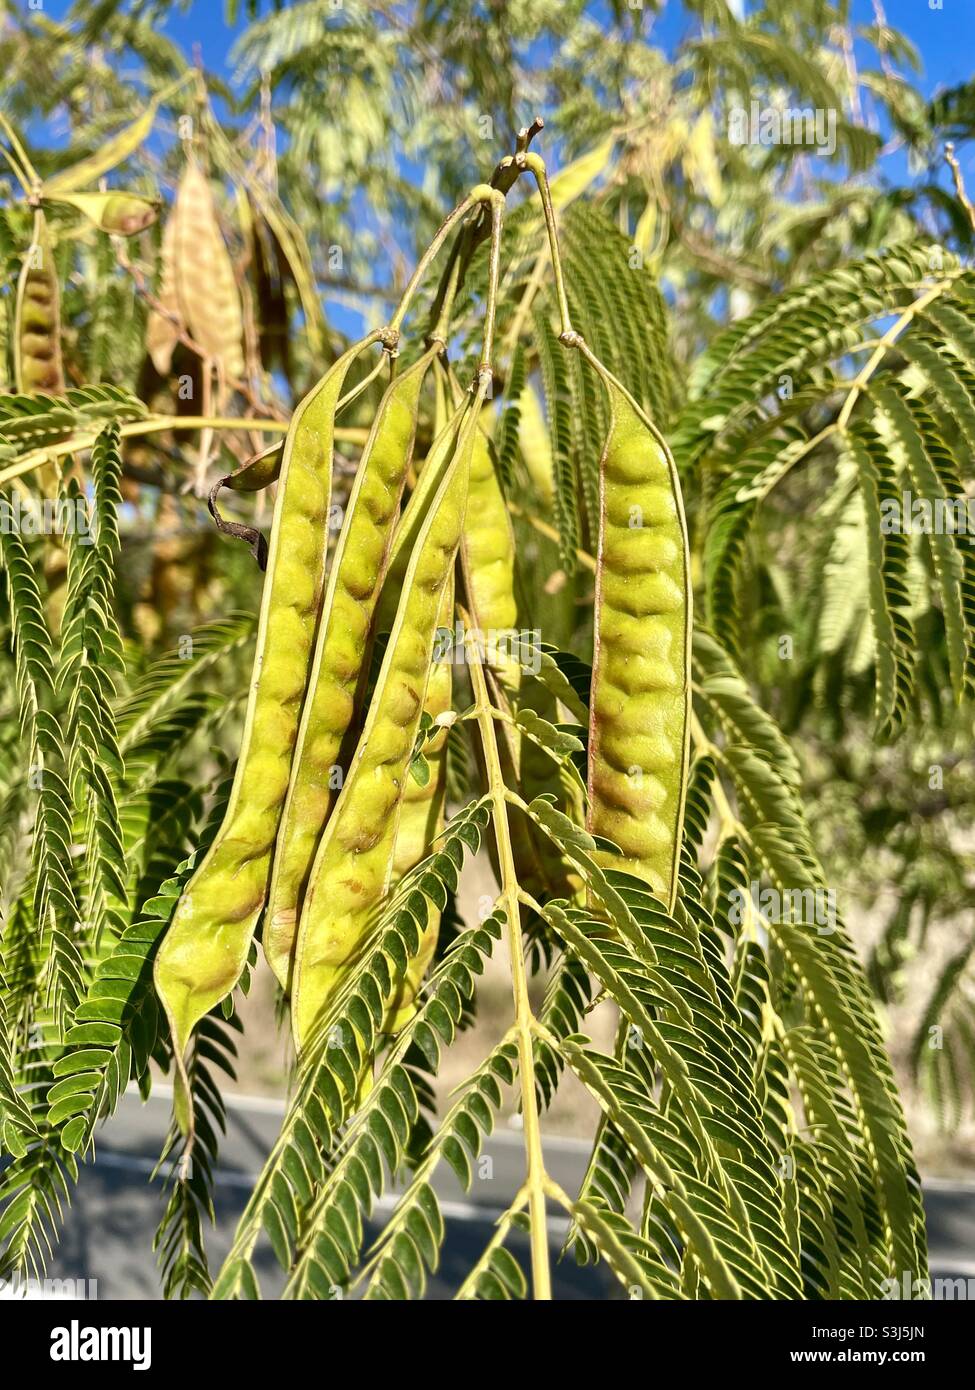 Seed pods and leaves of a Mimosa tree (Albizia julibrissin) Stock Photo